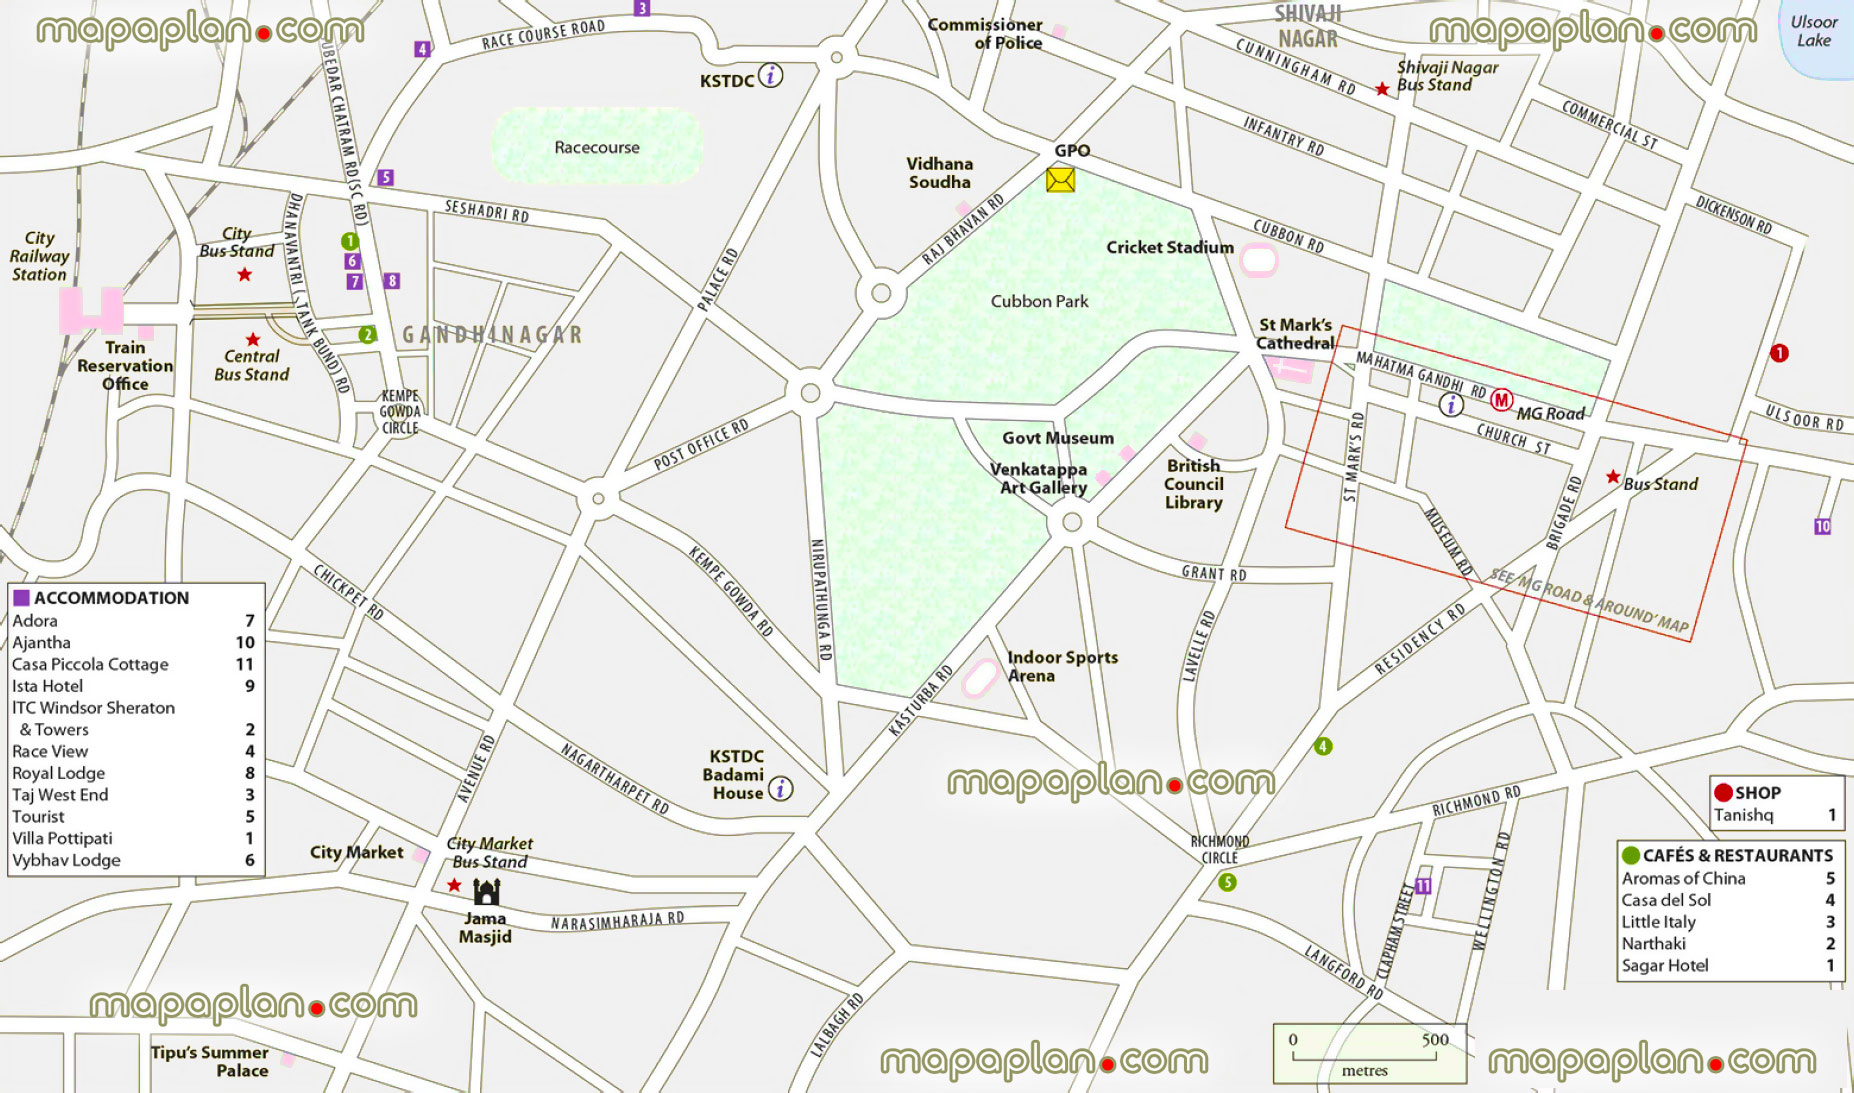 cubbon park central bangalore city pop up attractions hotels restaurants free download print 1 day trip travel guide locations major attractions great historic spots best must see sights detailed view orientation navigation directionss Bangalore Top tourist attractions map